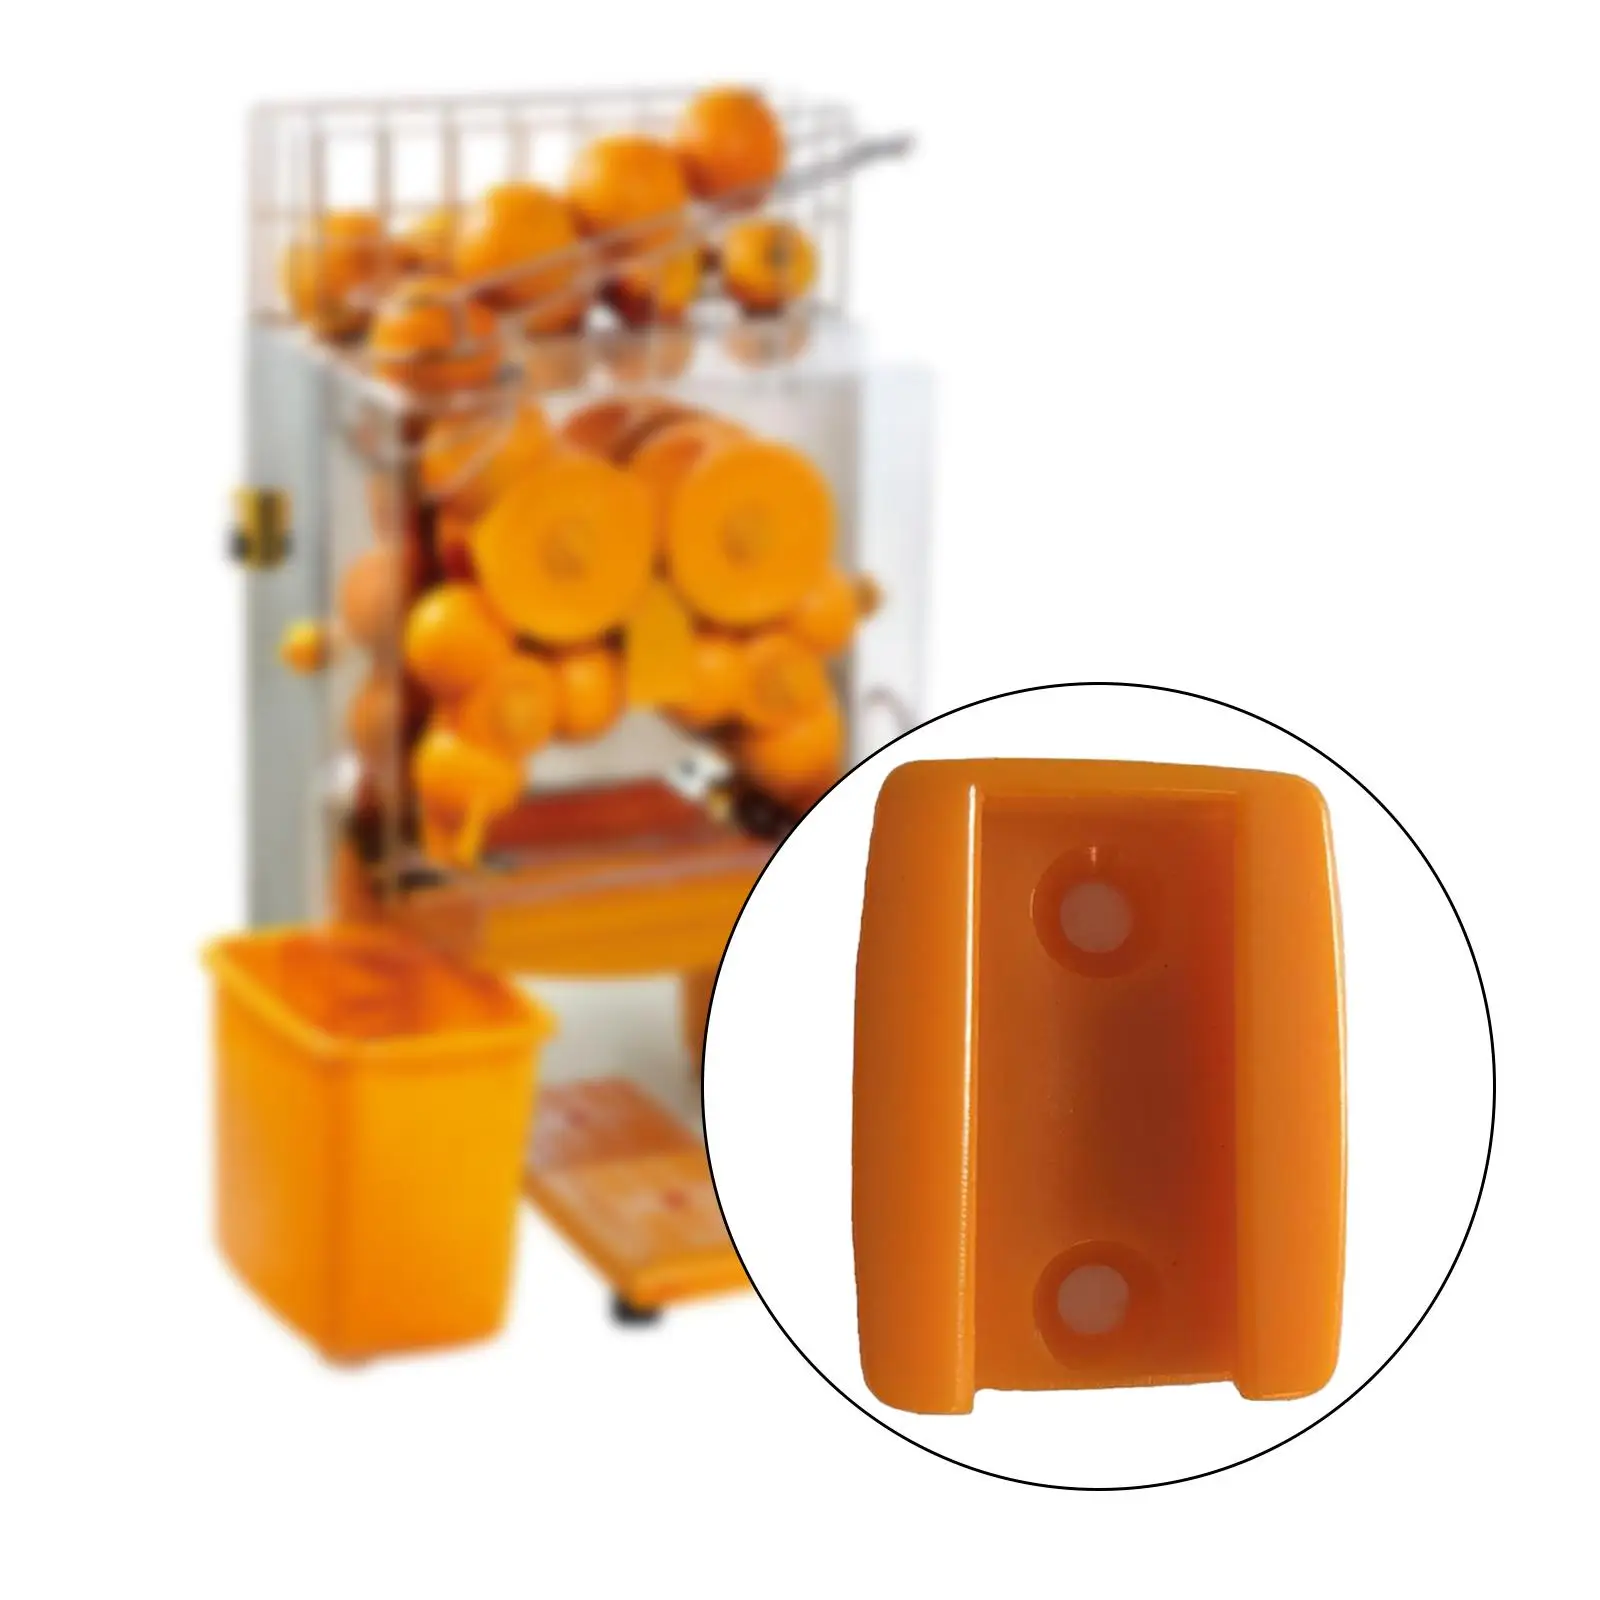 Orange Juicer Parts Holder Commercial and Electric Juicer Parts Electric Orange Juicer Parts Fixing Accessories for XC-2000E